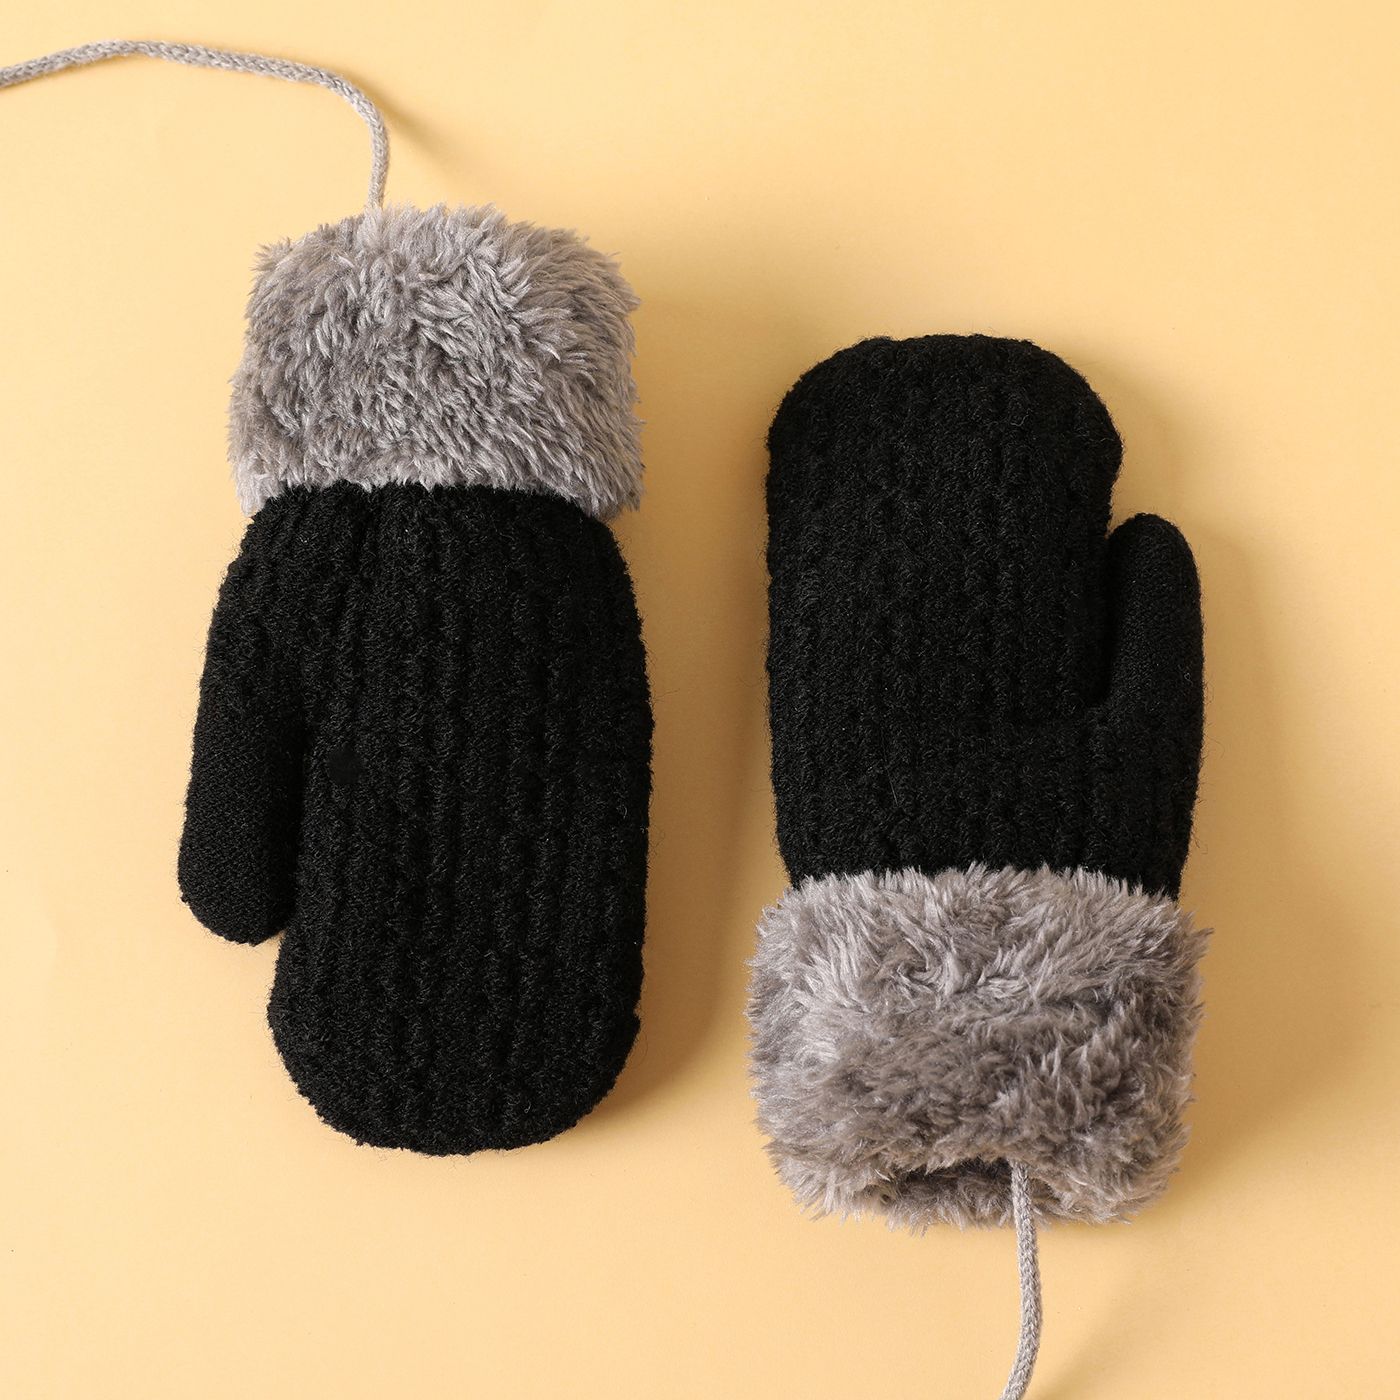 Toddler Plush Mittens with String